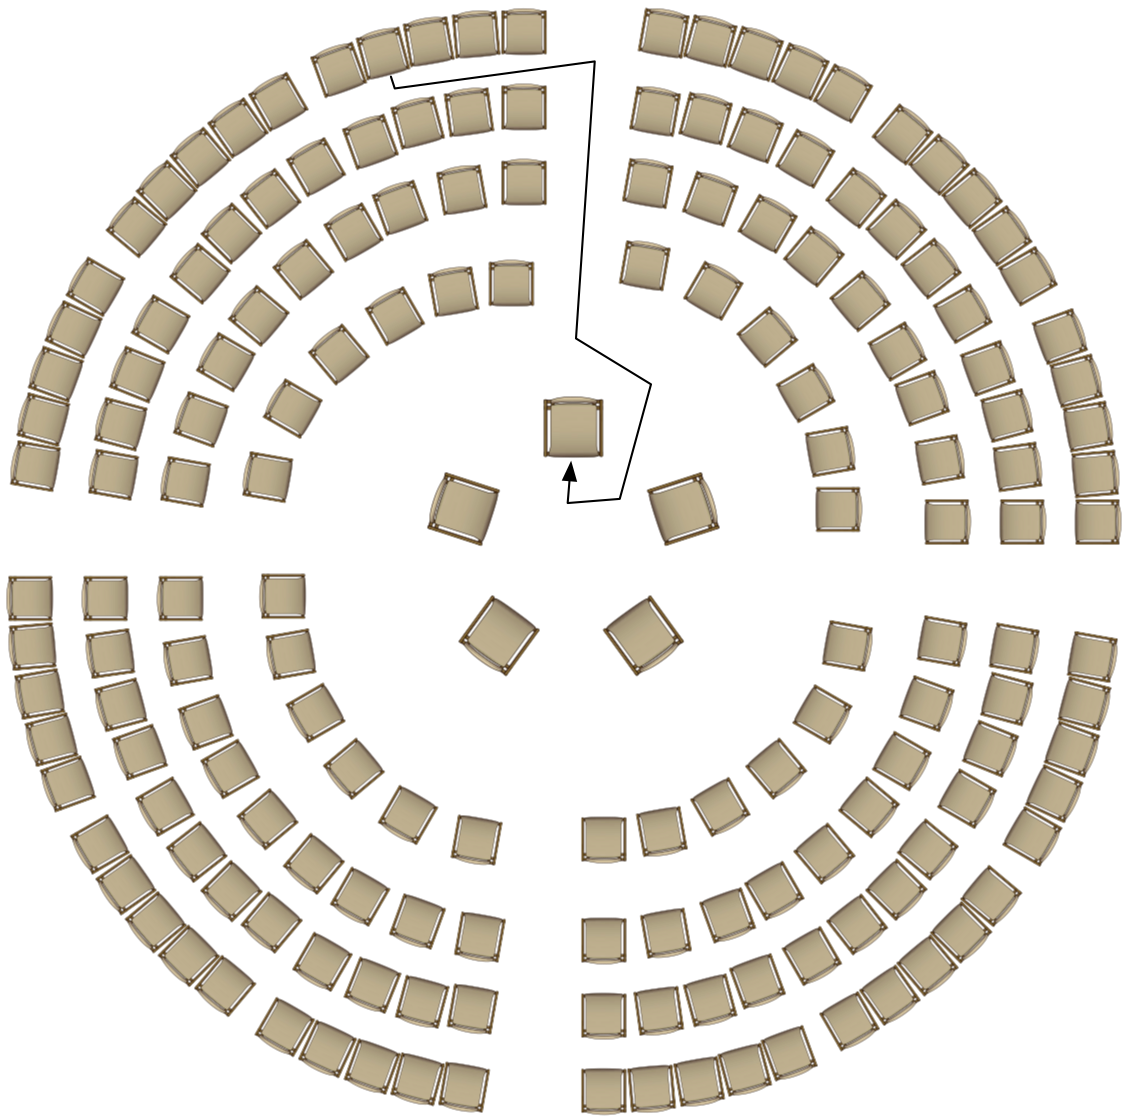 fishbowl seating arrangment – inner and outer circles